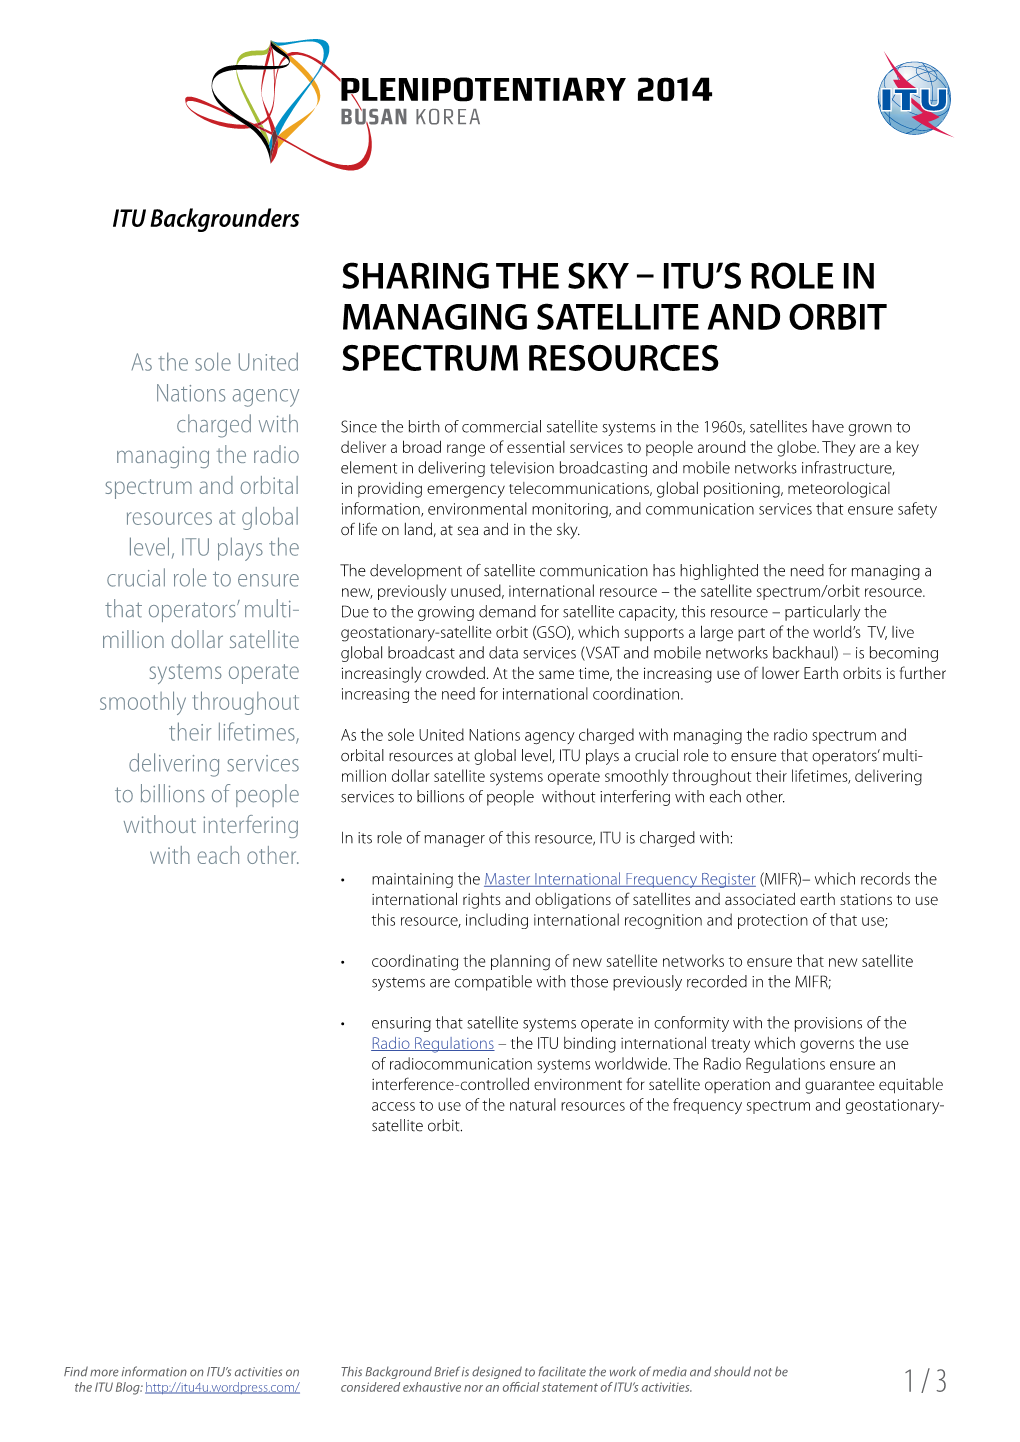 Sharing the Sky – ITU's Role in Managing Satellite and Orbit